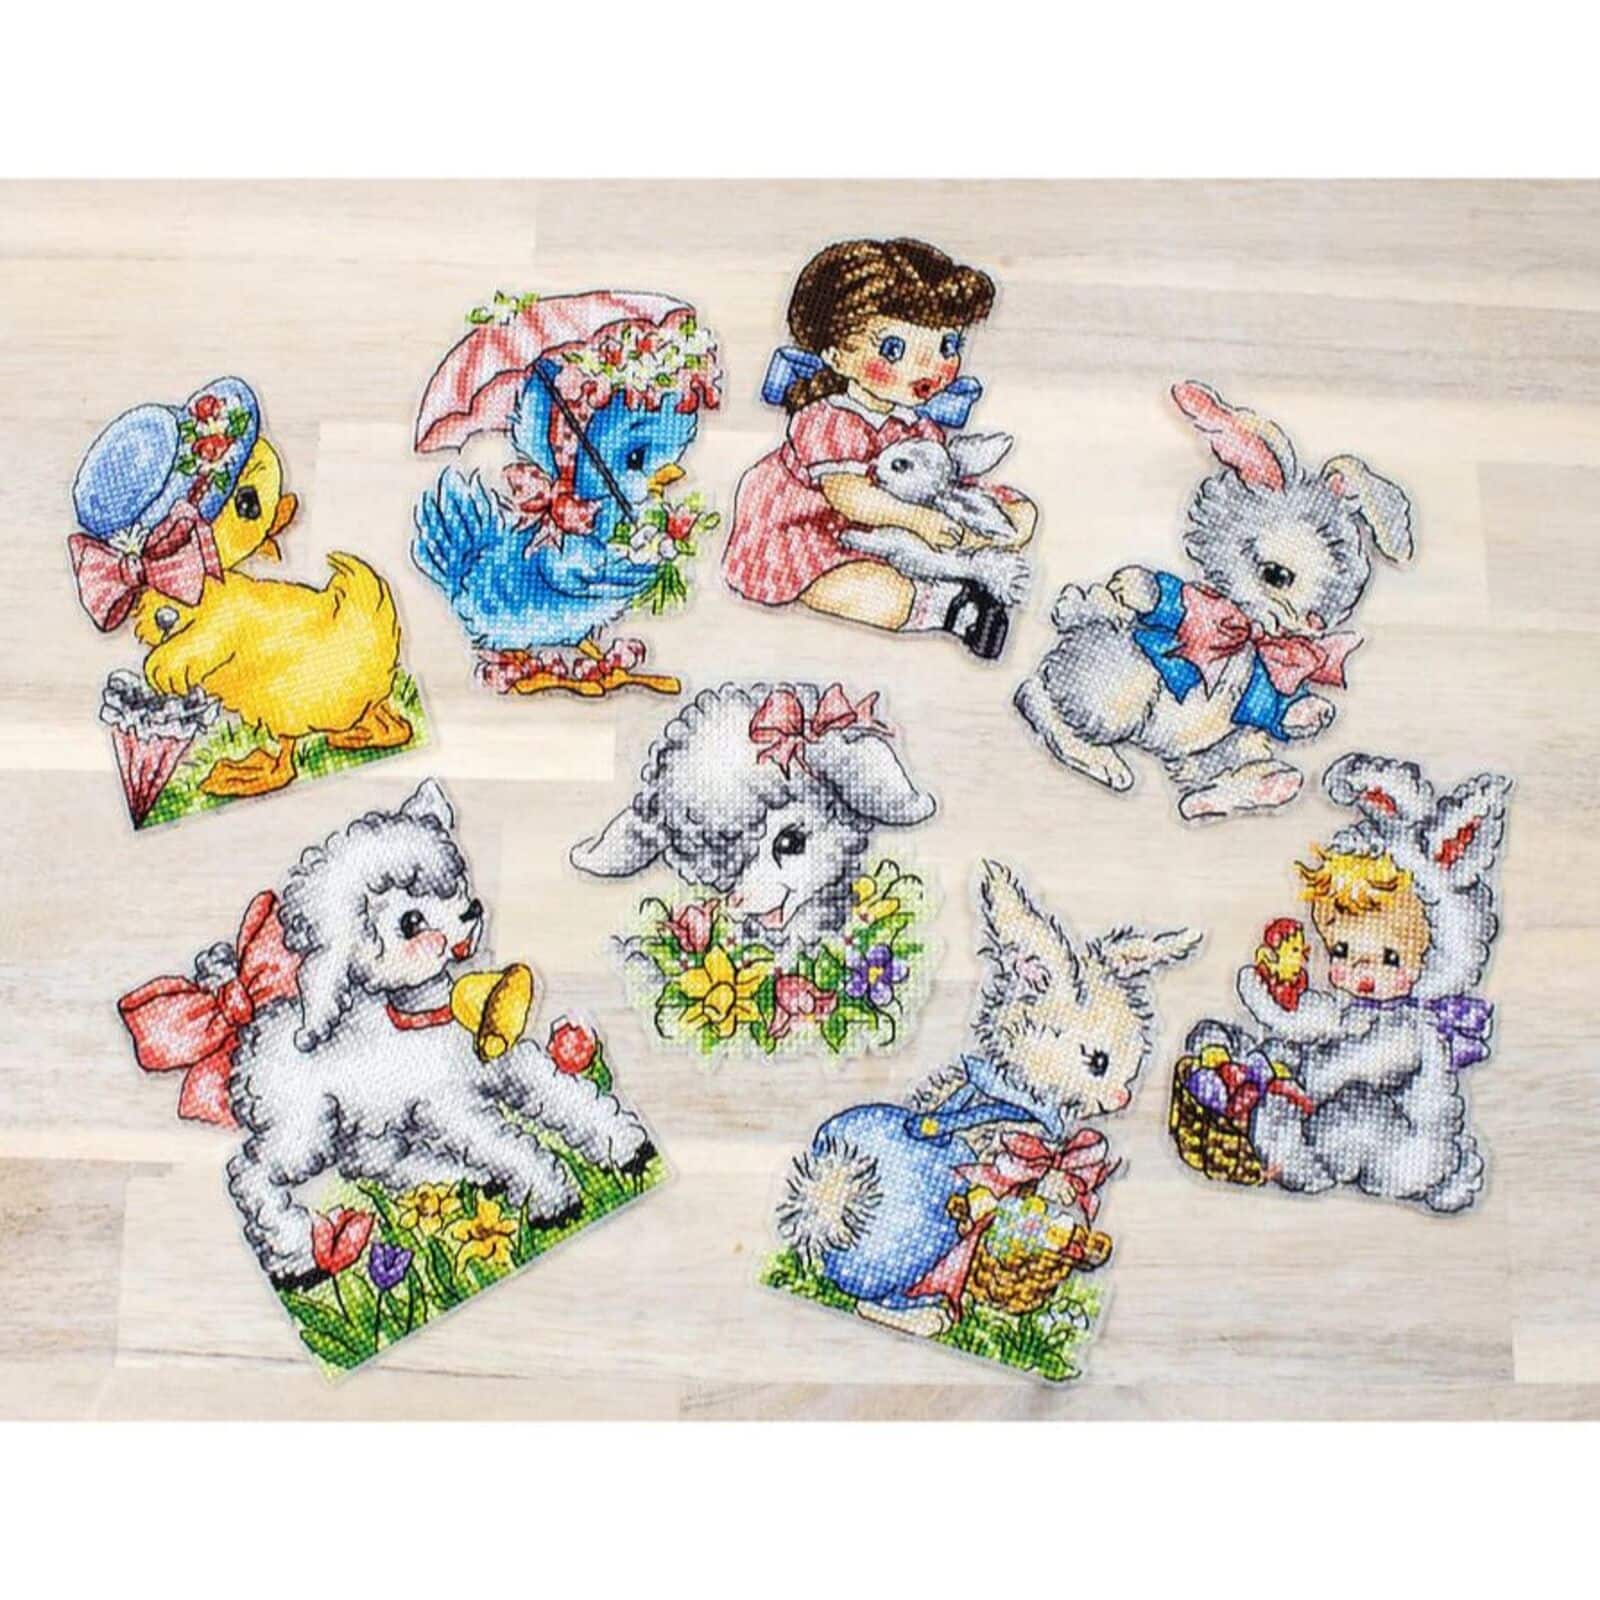 Letistitch Plastic Canvas Counted Cross Stitch Kit Easter Ornaments Kit, 8Ct.